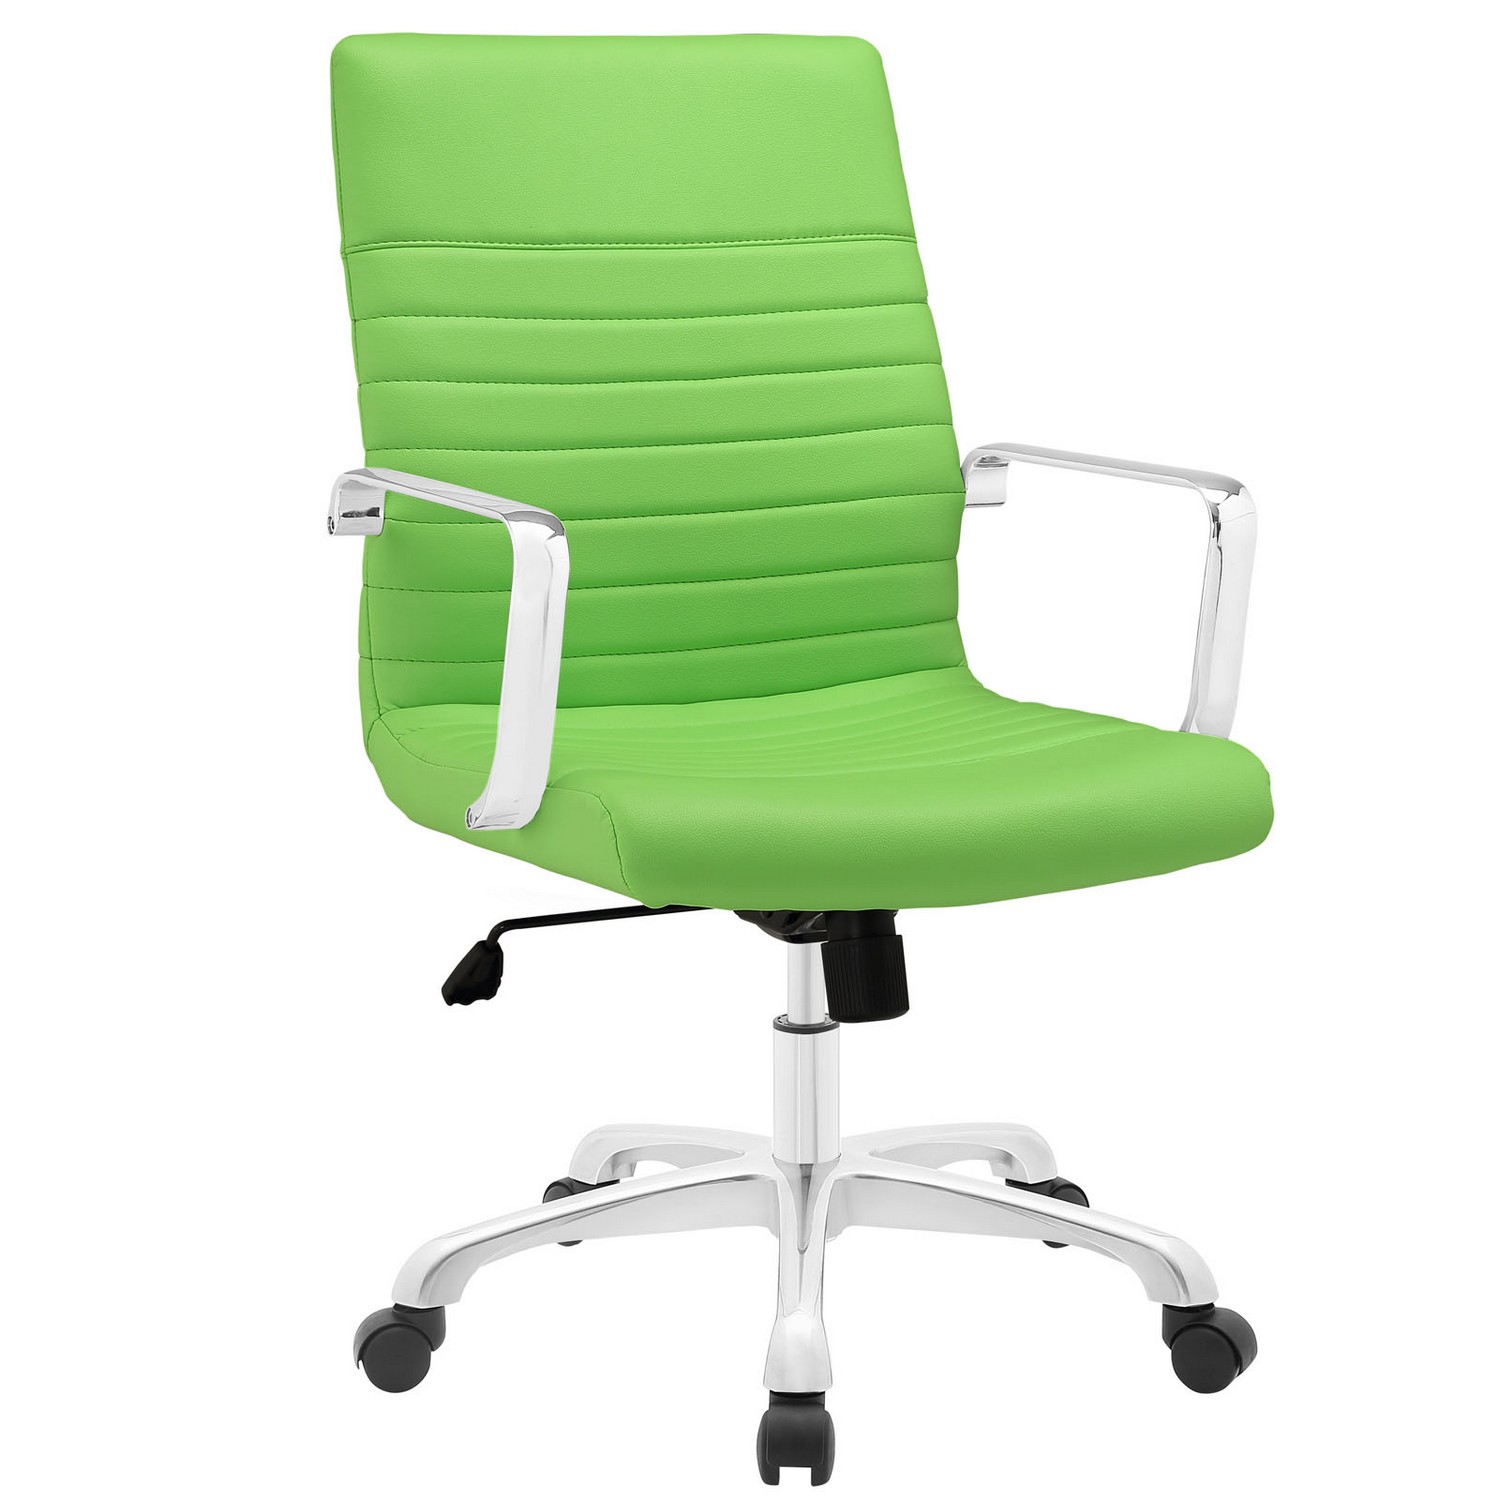 Modway Finesse Mid Back Office Chair - Bright Green